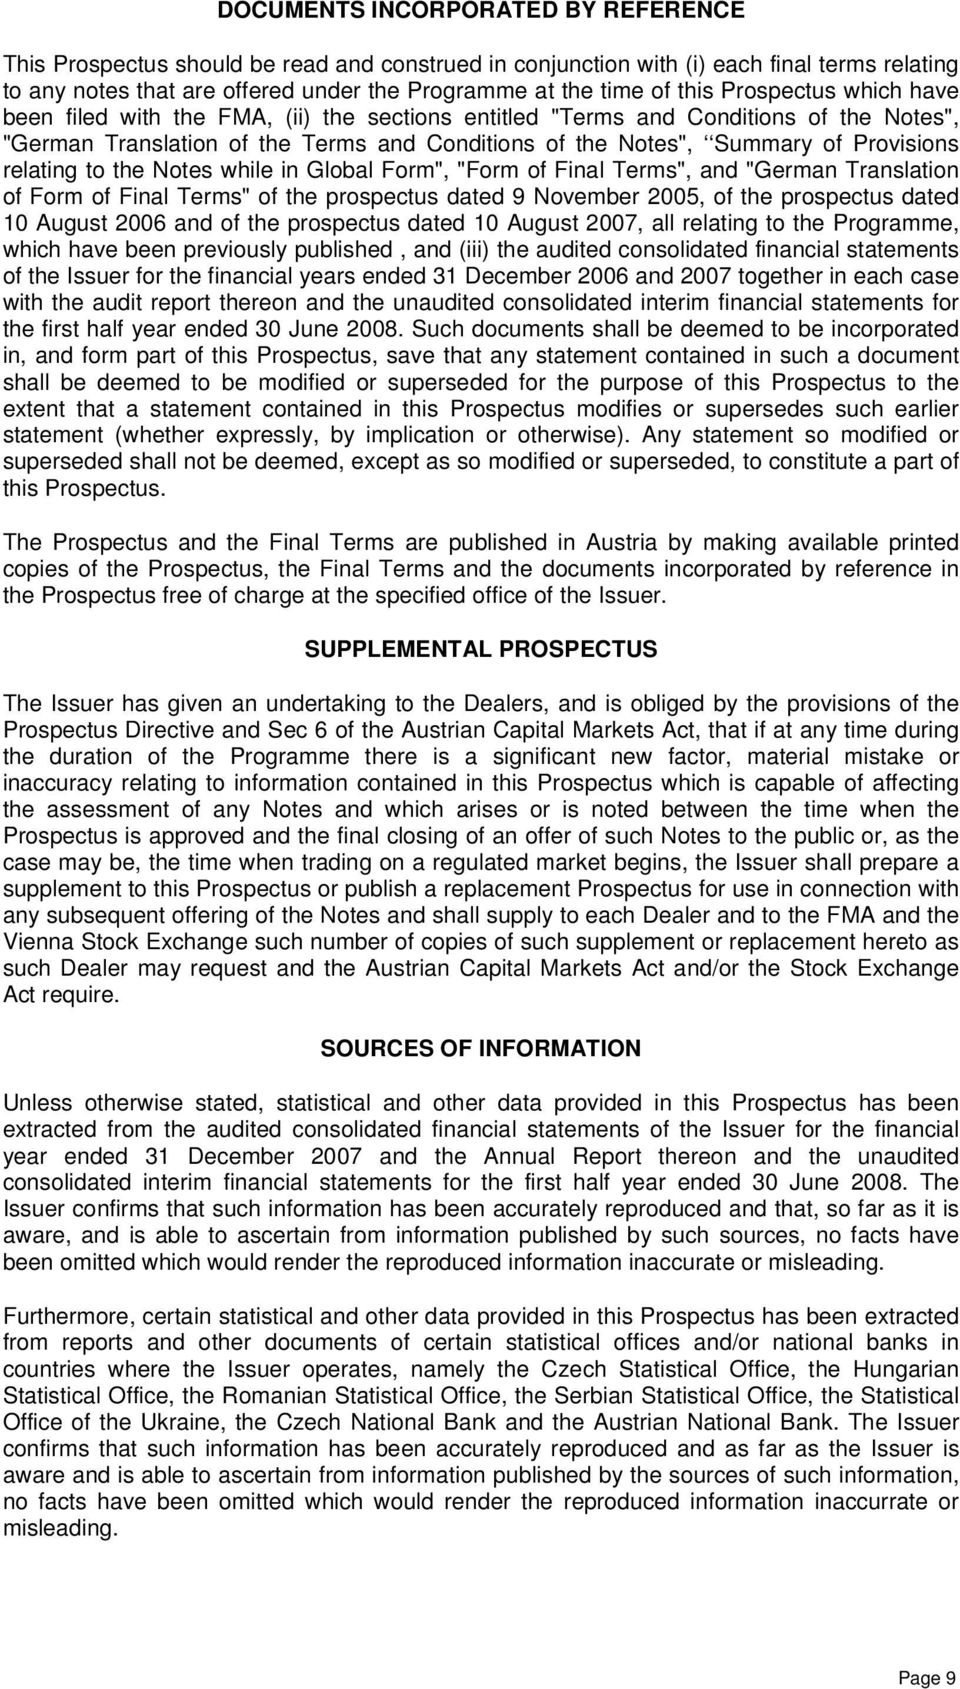 Provisions relating to the Notes while in Global Form", "Form of Final Terms", and "German Translation of Form of Final Terms" of the prospectus dated 9 November 2005, of the prospectus dated 10